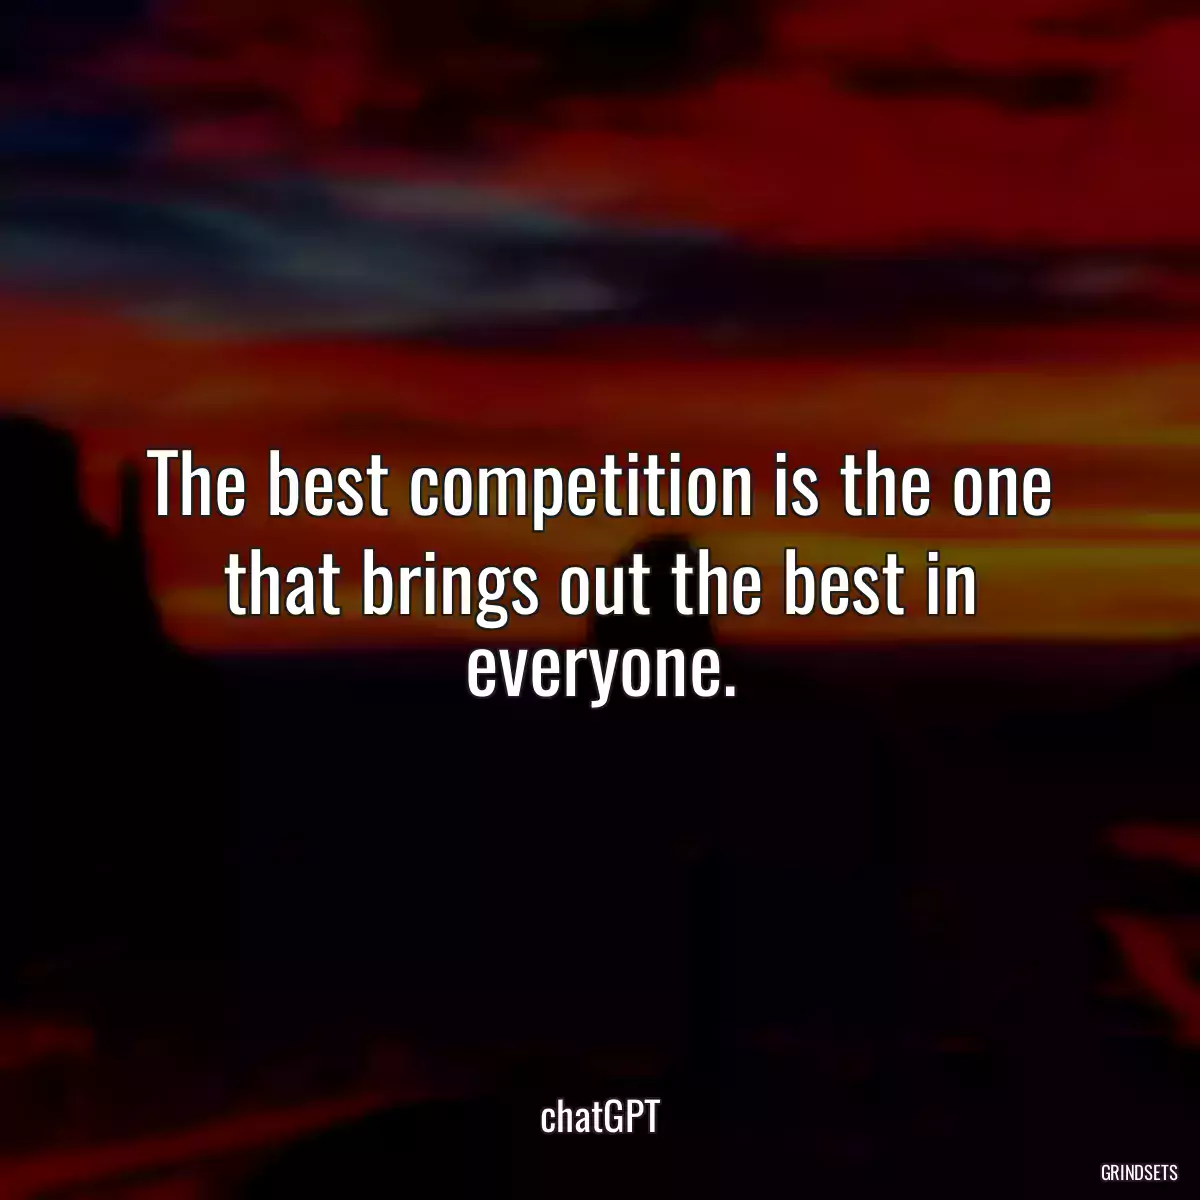 The best competition is the one that brings out the best in everyone.